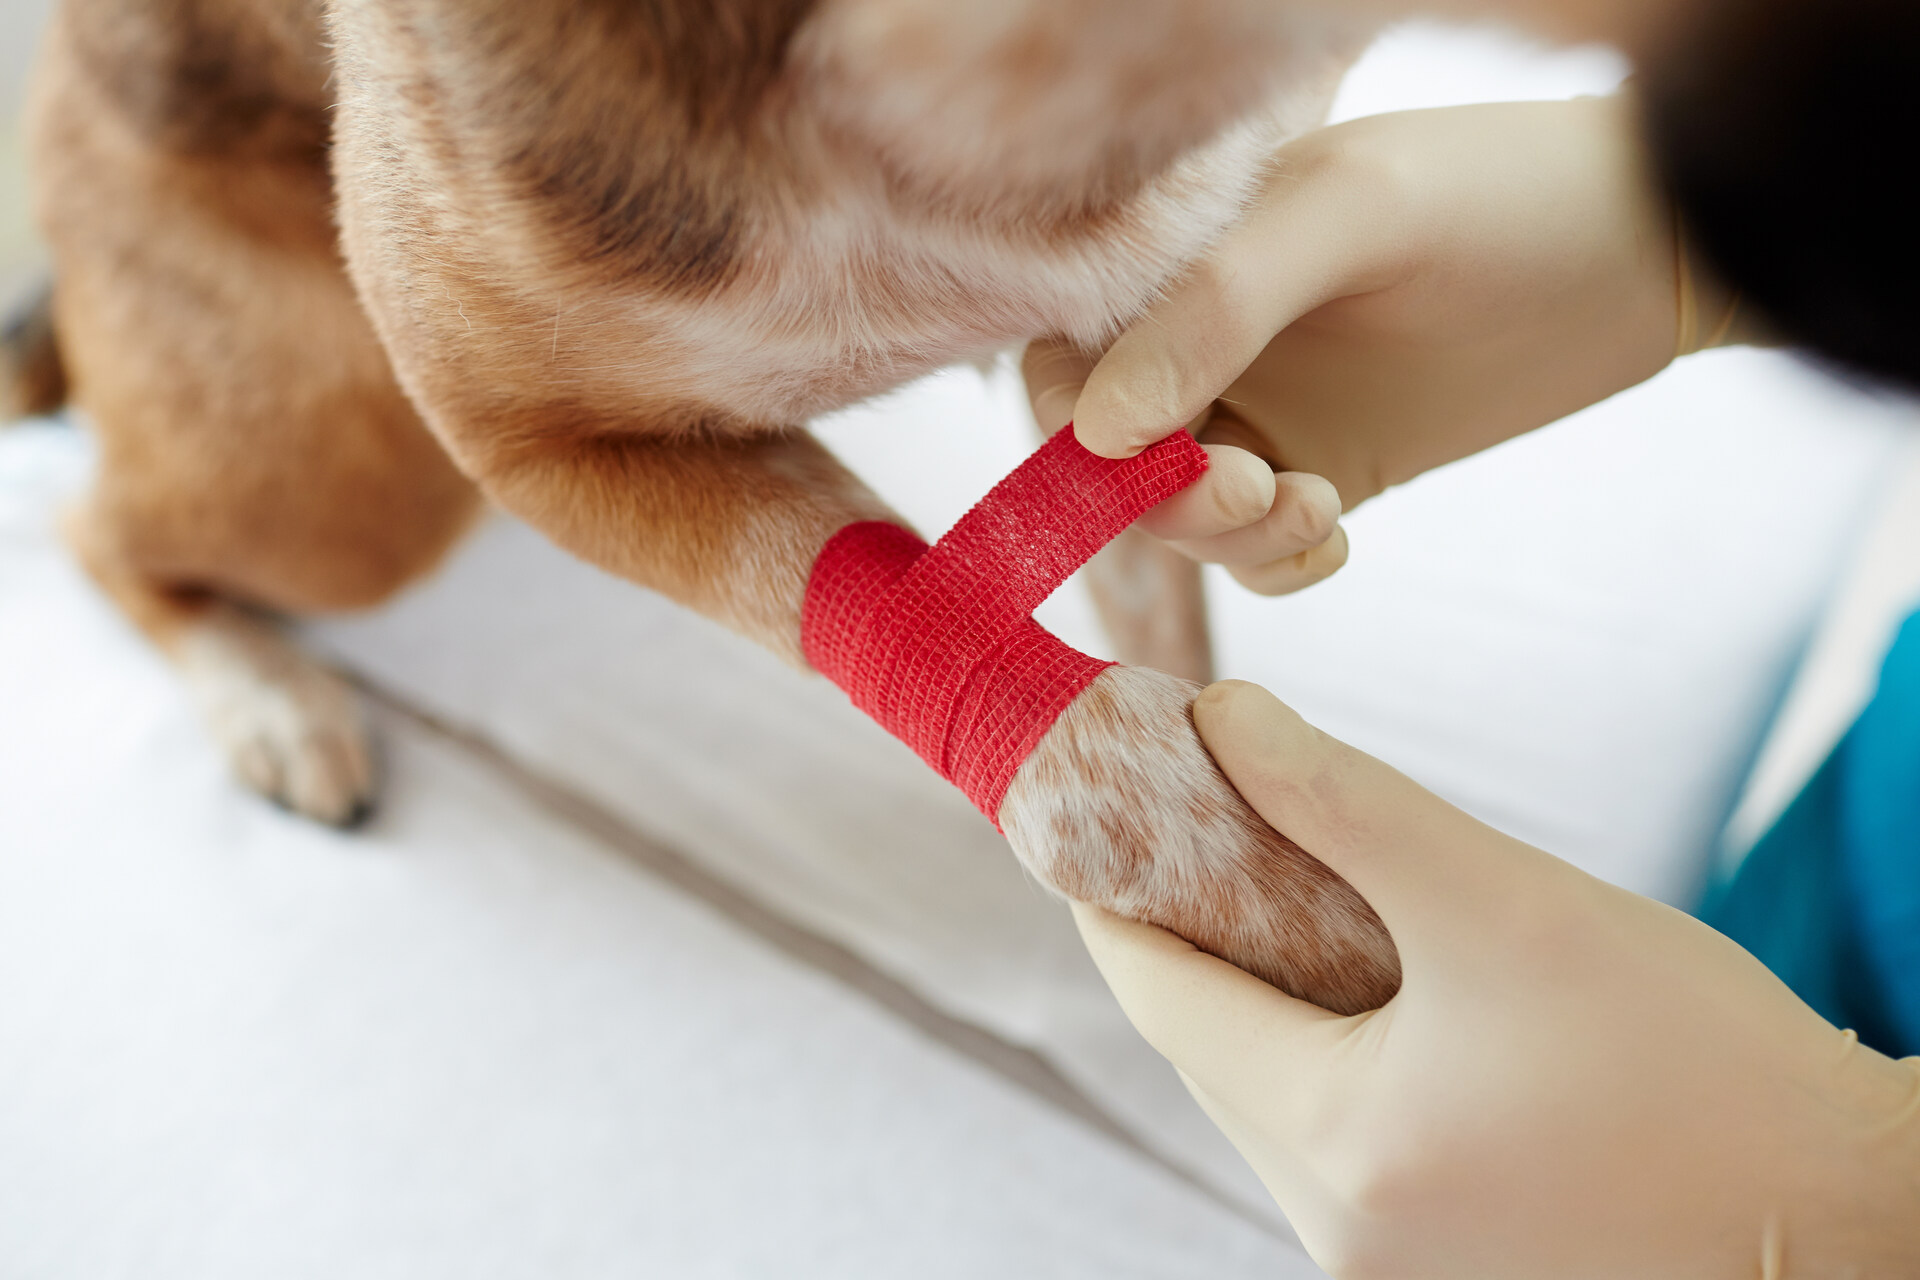 A vet bandaging a dog's paw with red gauze